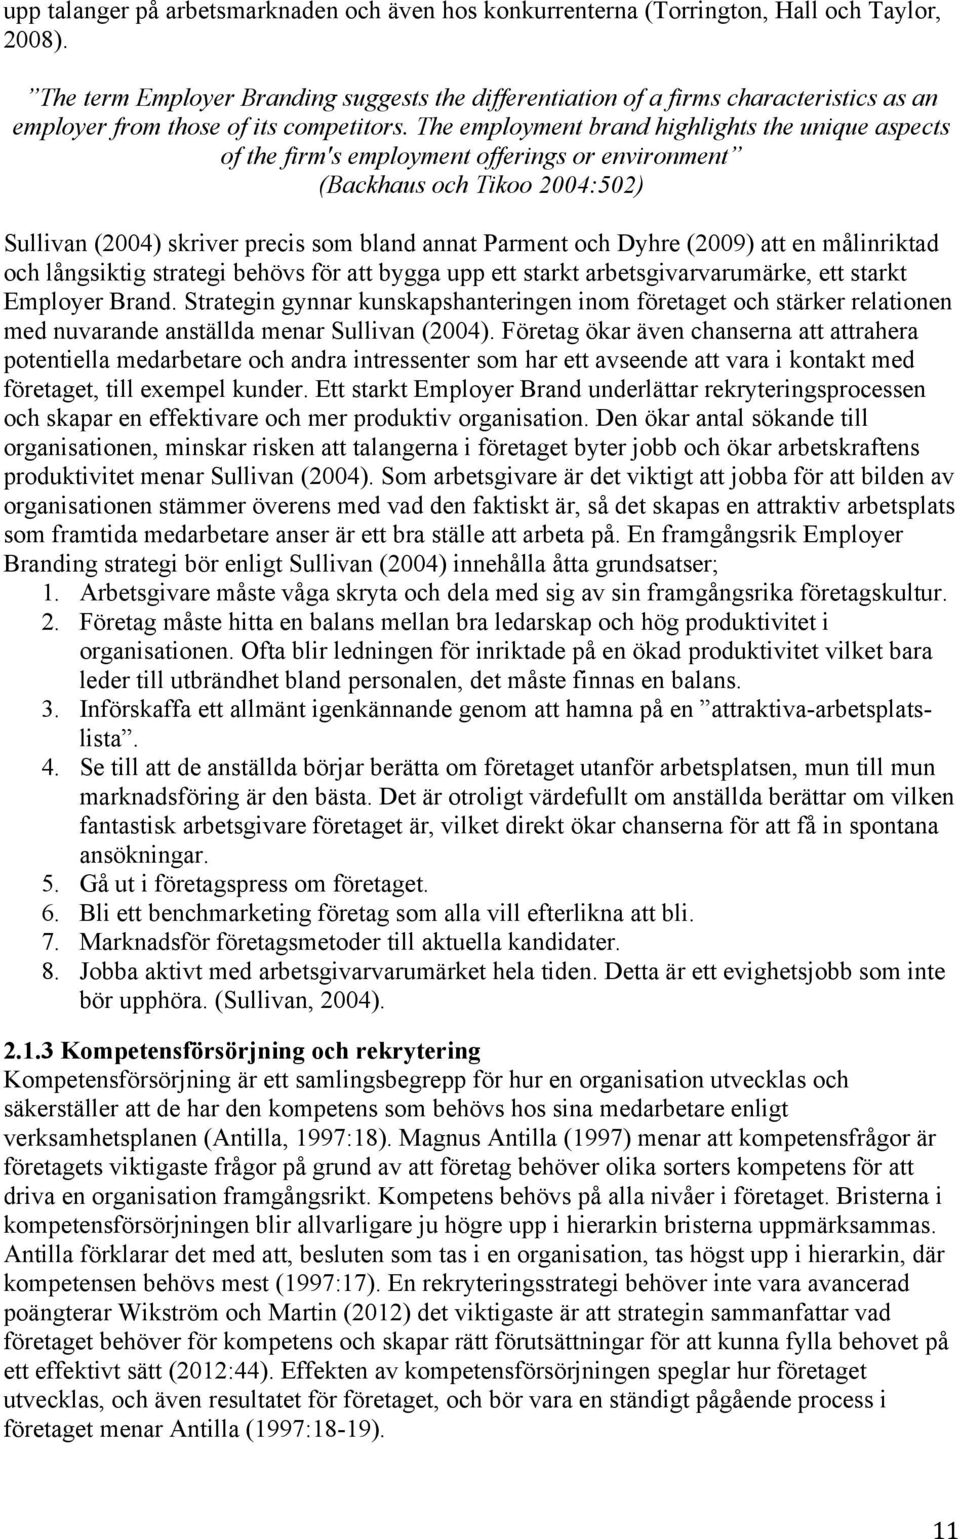 The employment brand highlights the unique aspects of the firm's employment offerings or environment (Backhaus och Tikoo 2004:502) Sullivan (2004) skriver precis som bland annat Parment och Dyhre